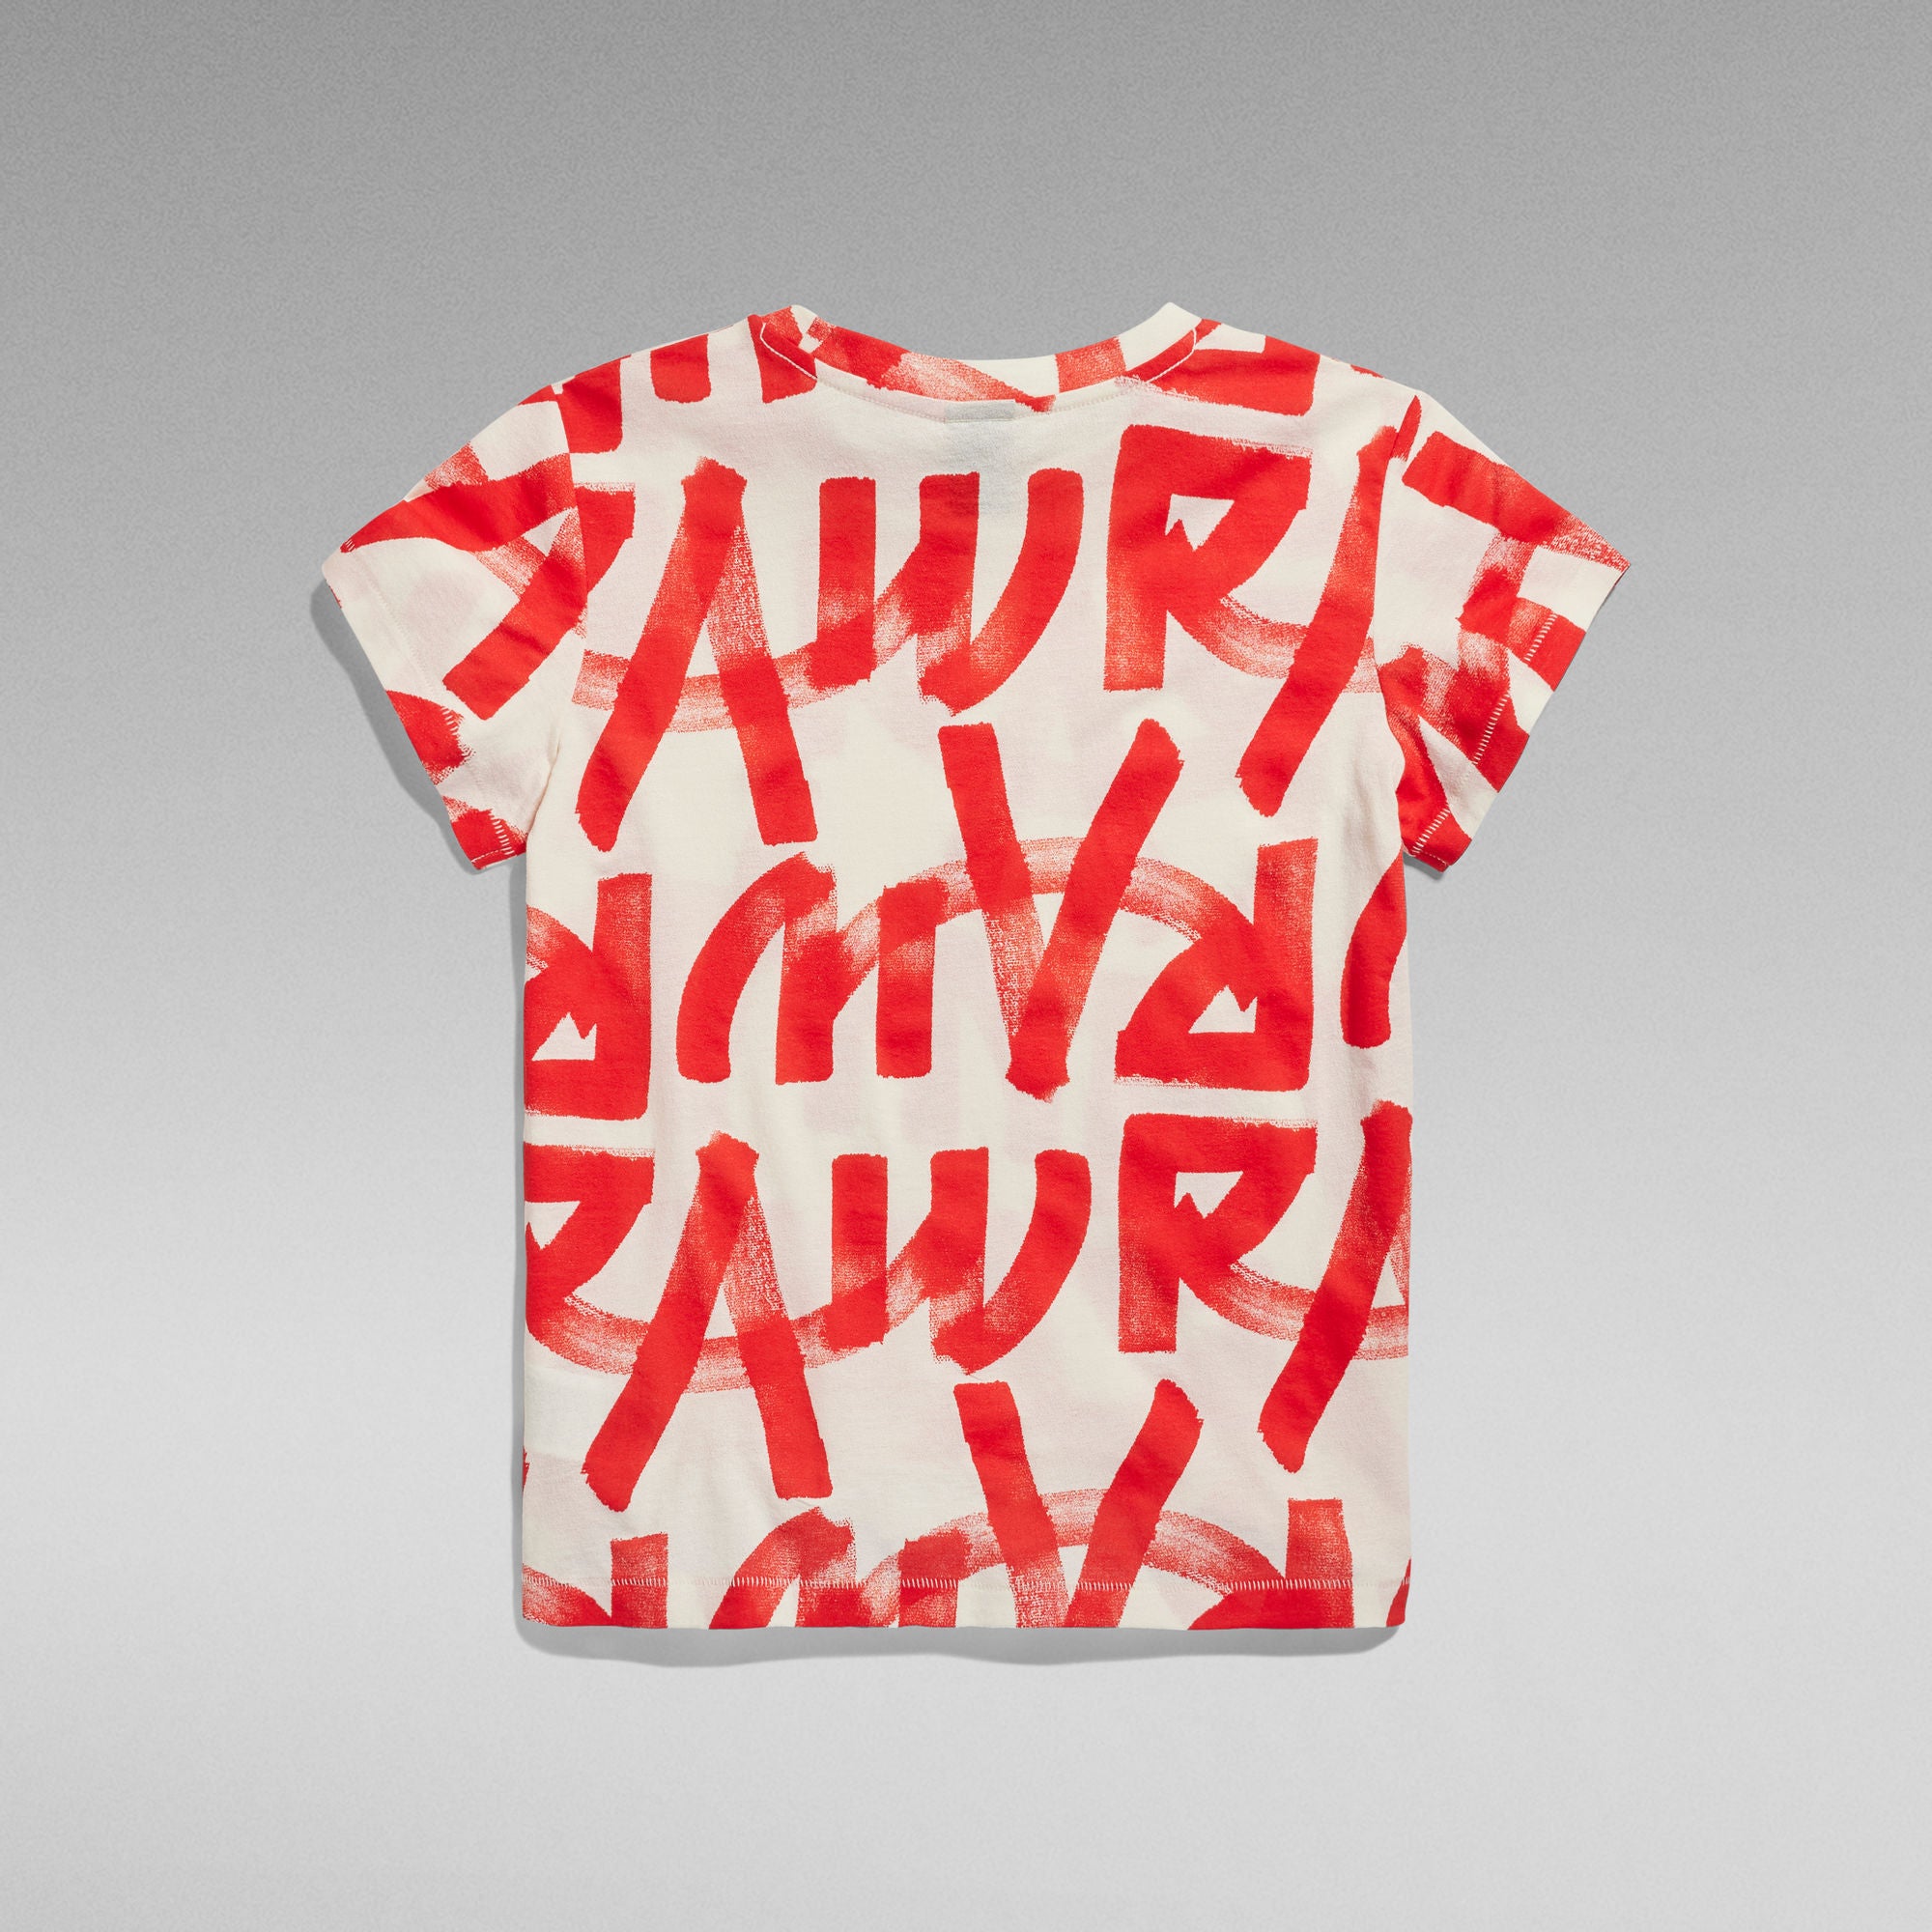 G-Star Raw - Calligraphy Allover Top - Antique White Inv Raw Paint